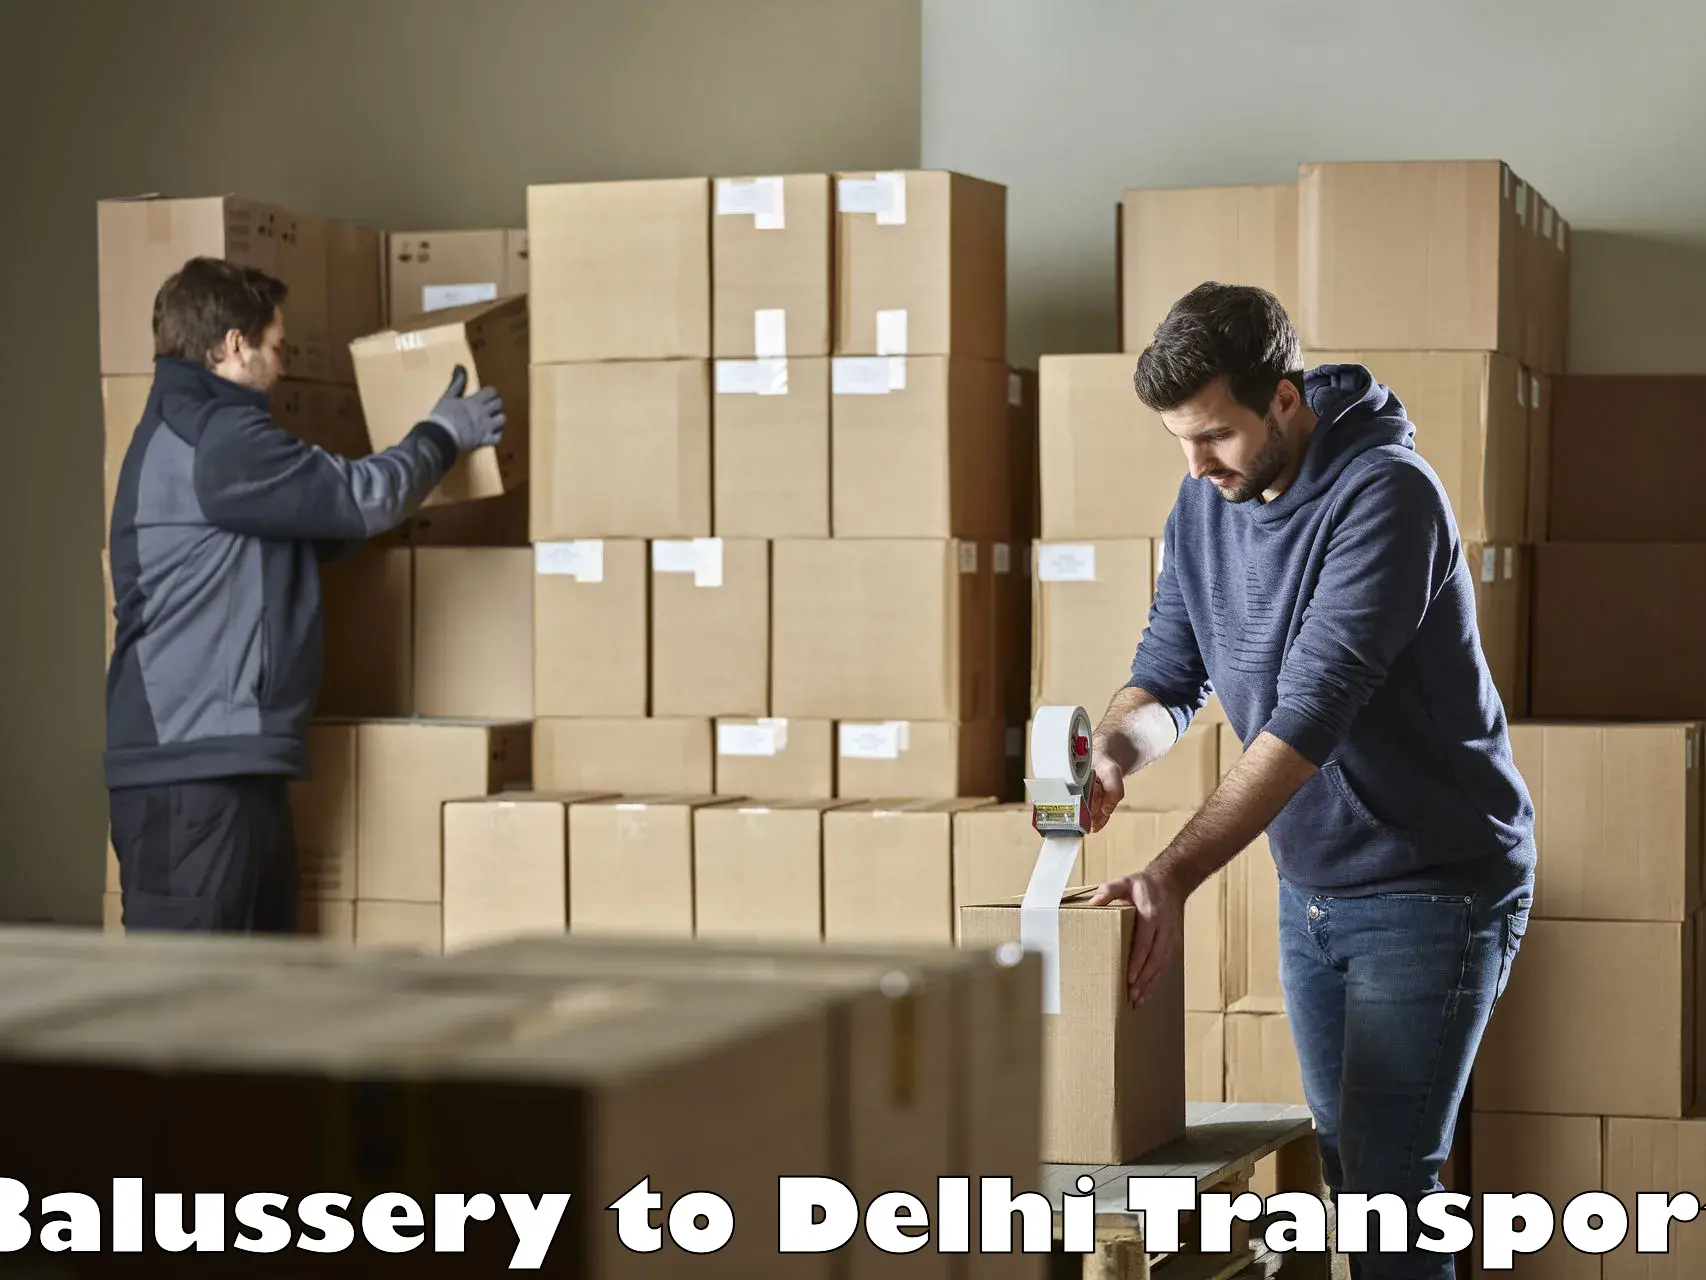 Cycle transportation service Balussery to Delhi